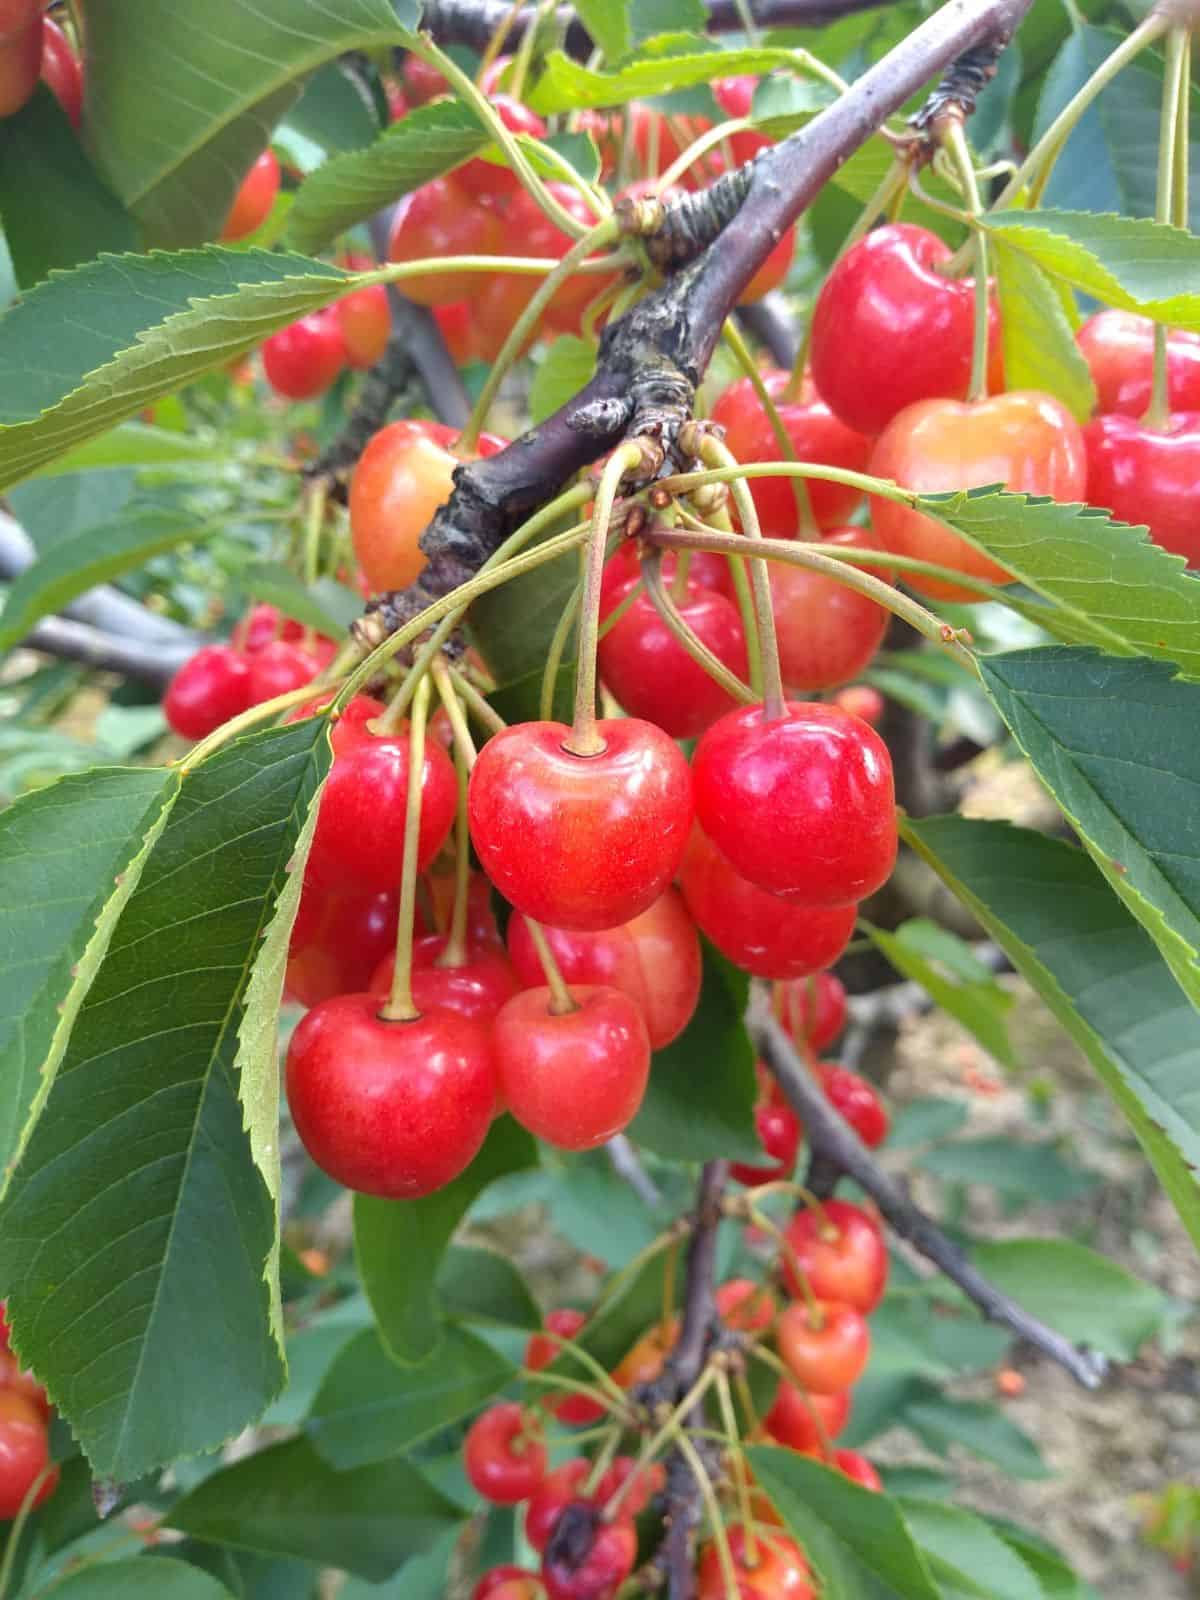 Light cherries with red blush hanging in trees.